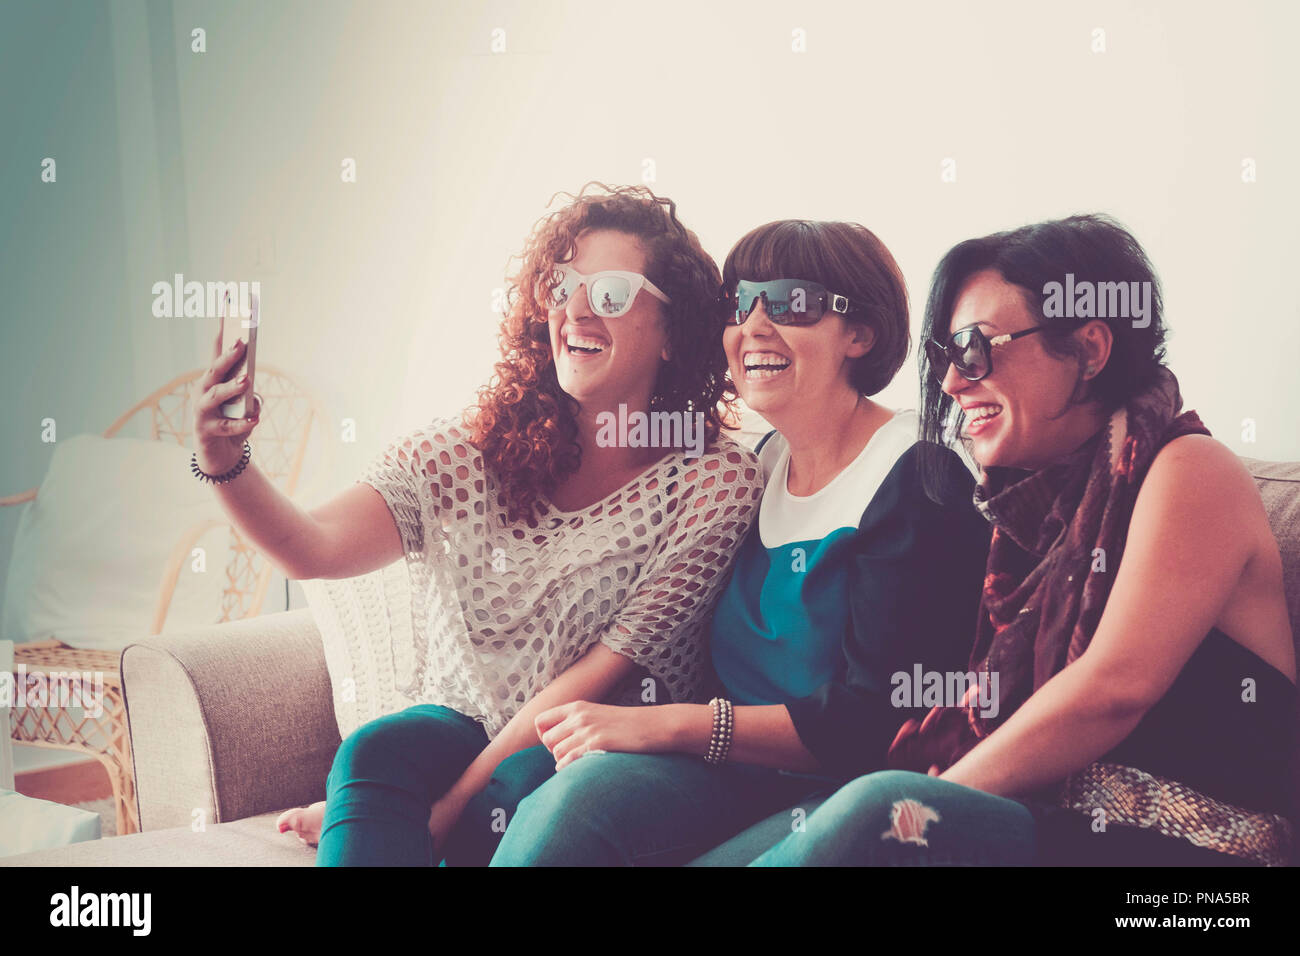 three caucasian young beautiful females doing a picture in selfie style with a mobile phone at home sit down on the sofa. friendship and connected wit Stock Photo